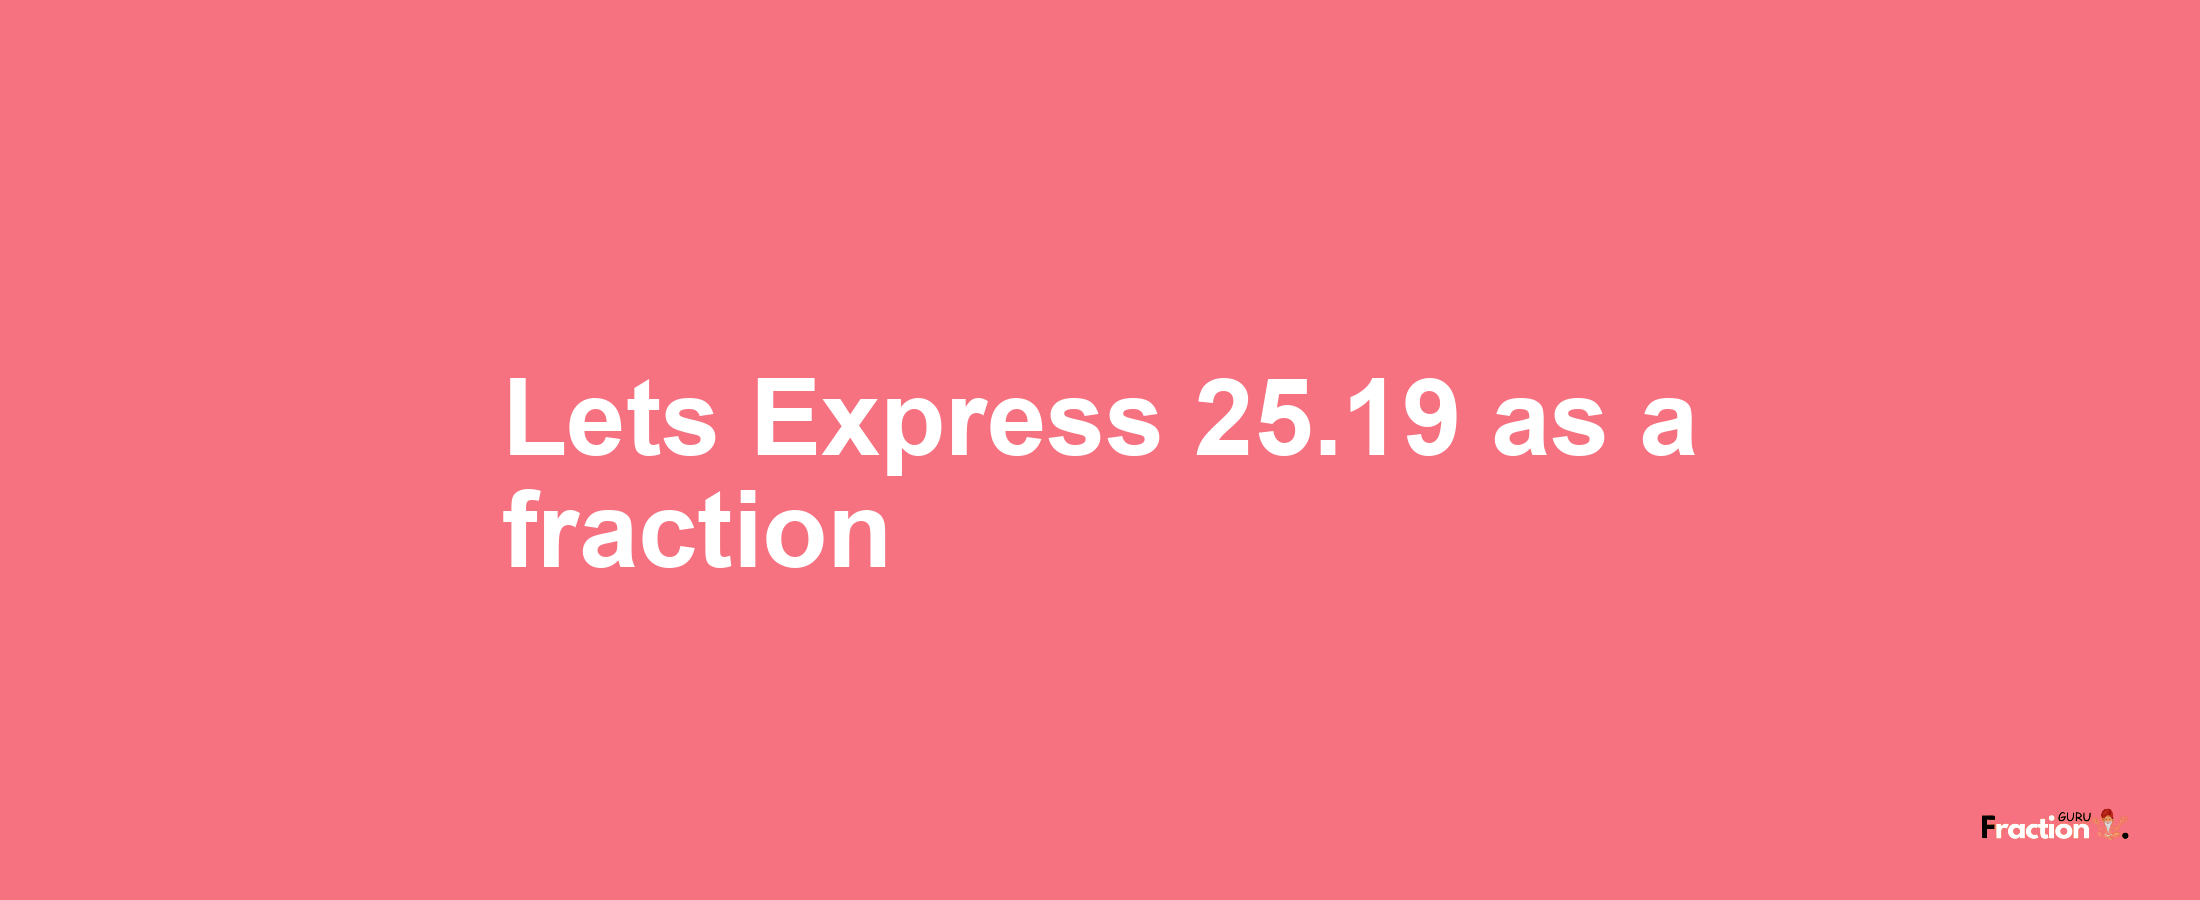 Lets Express 25.19 as afraction